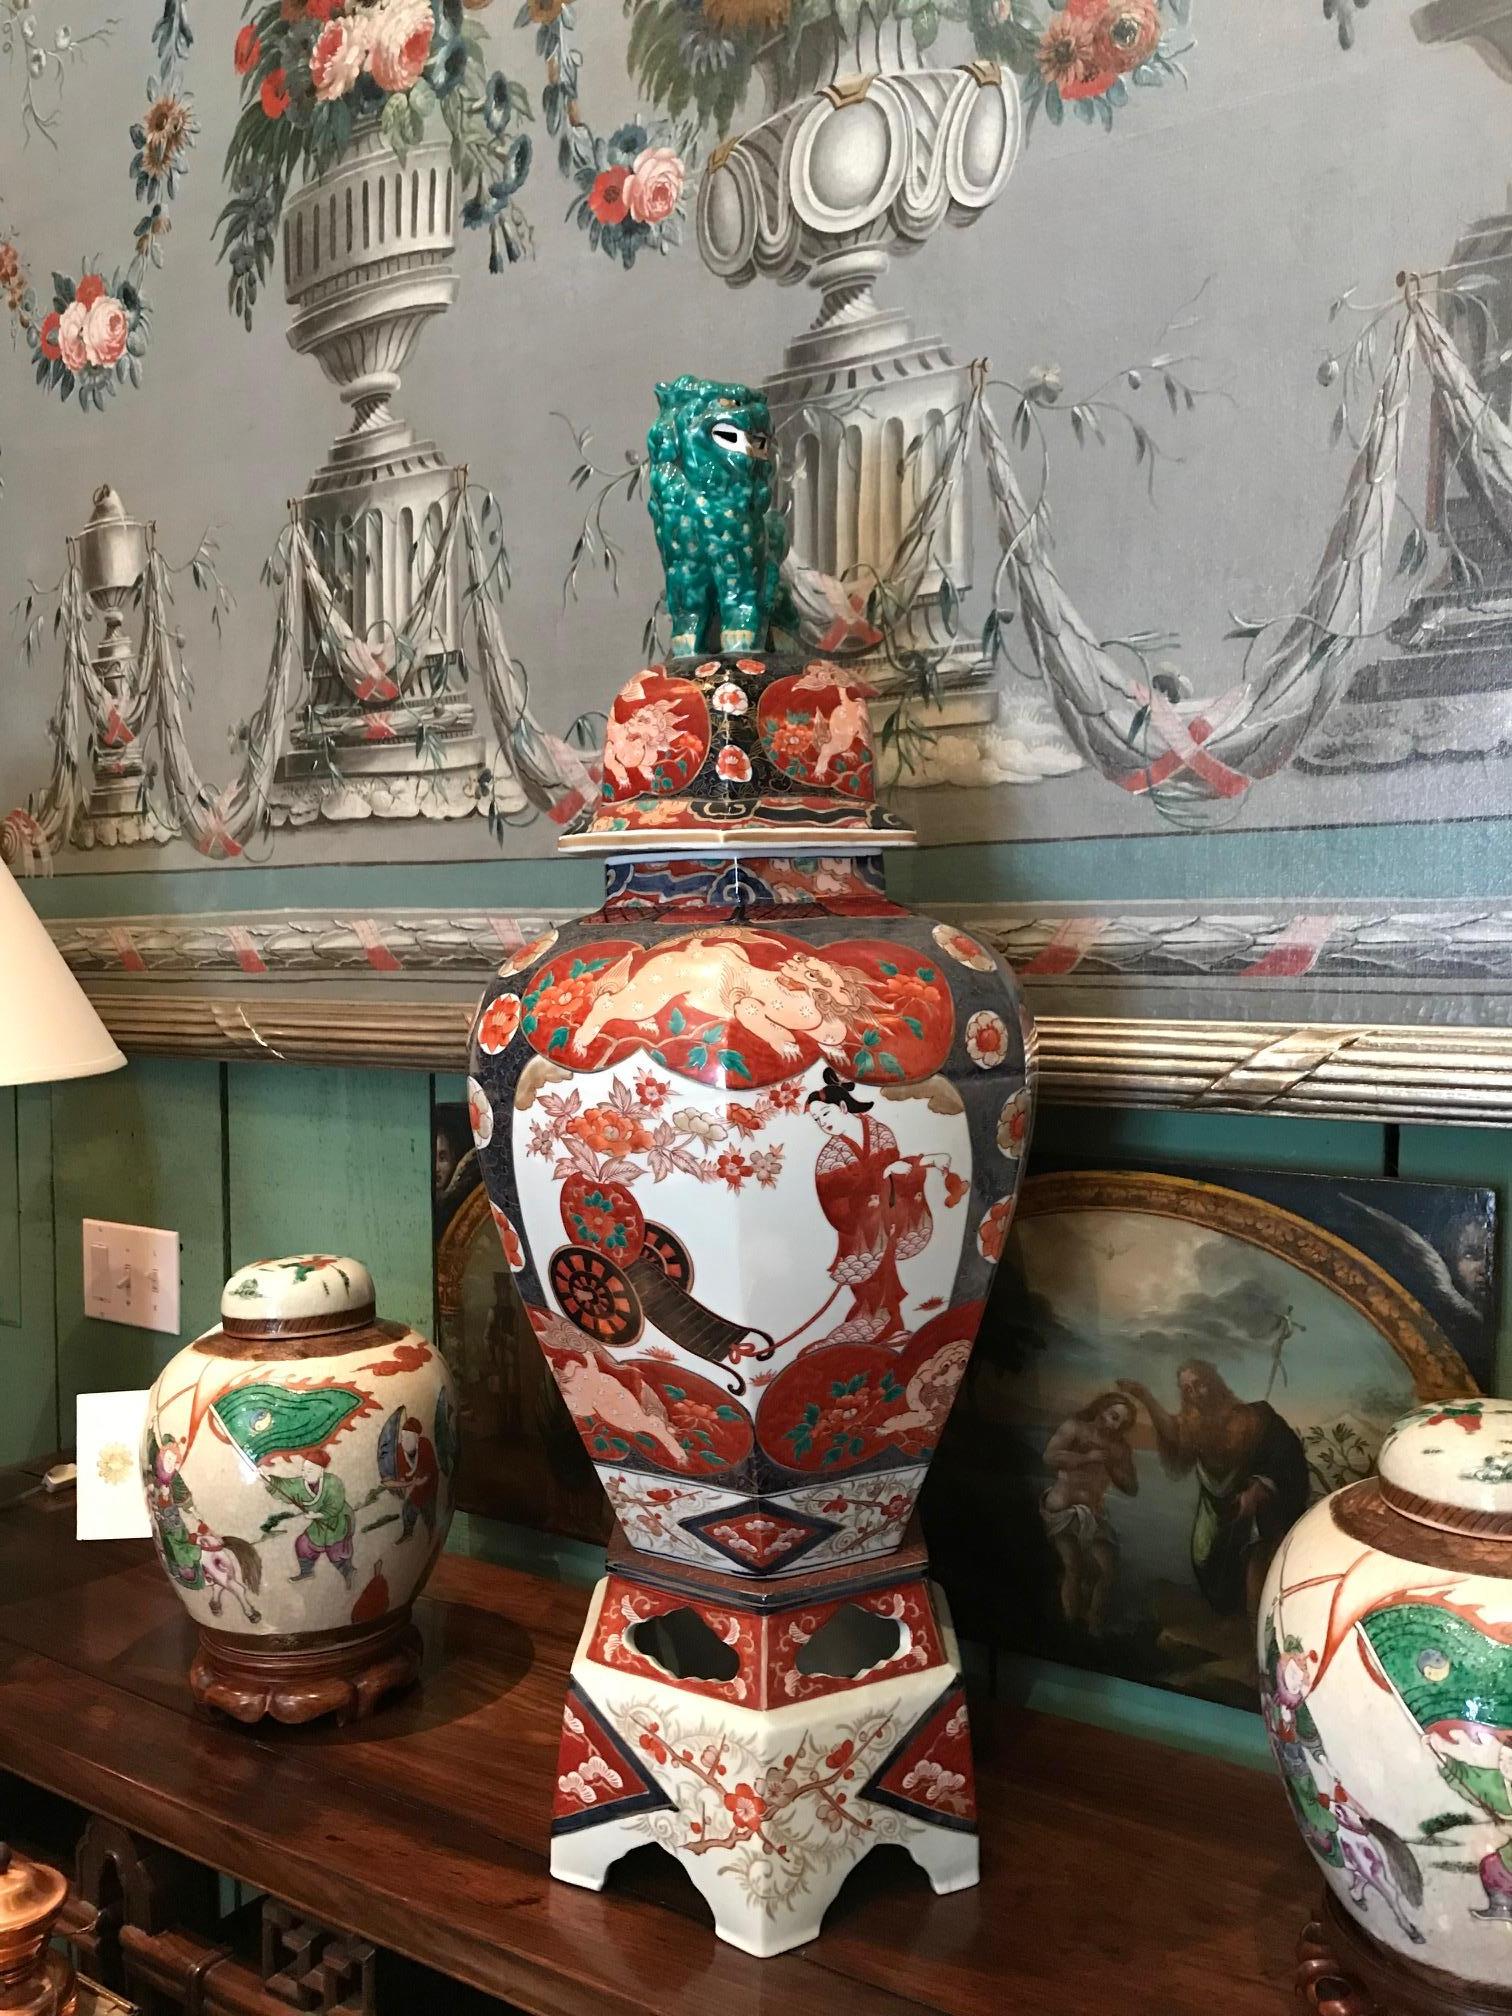 A large and impressive pair of 19th century Japanese Imari Baluster lidded vase with cover, having Foo dogs on the lid, intricately hand painted floral panels pattern and surrounds of wisteria and chrysanthemums. Antique dealer Los Angeles Beverly